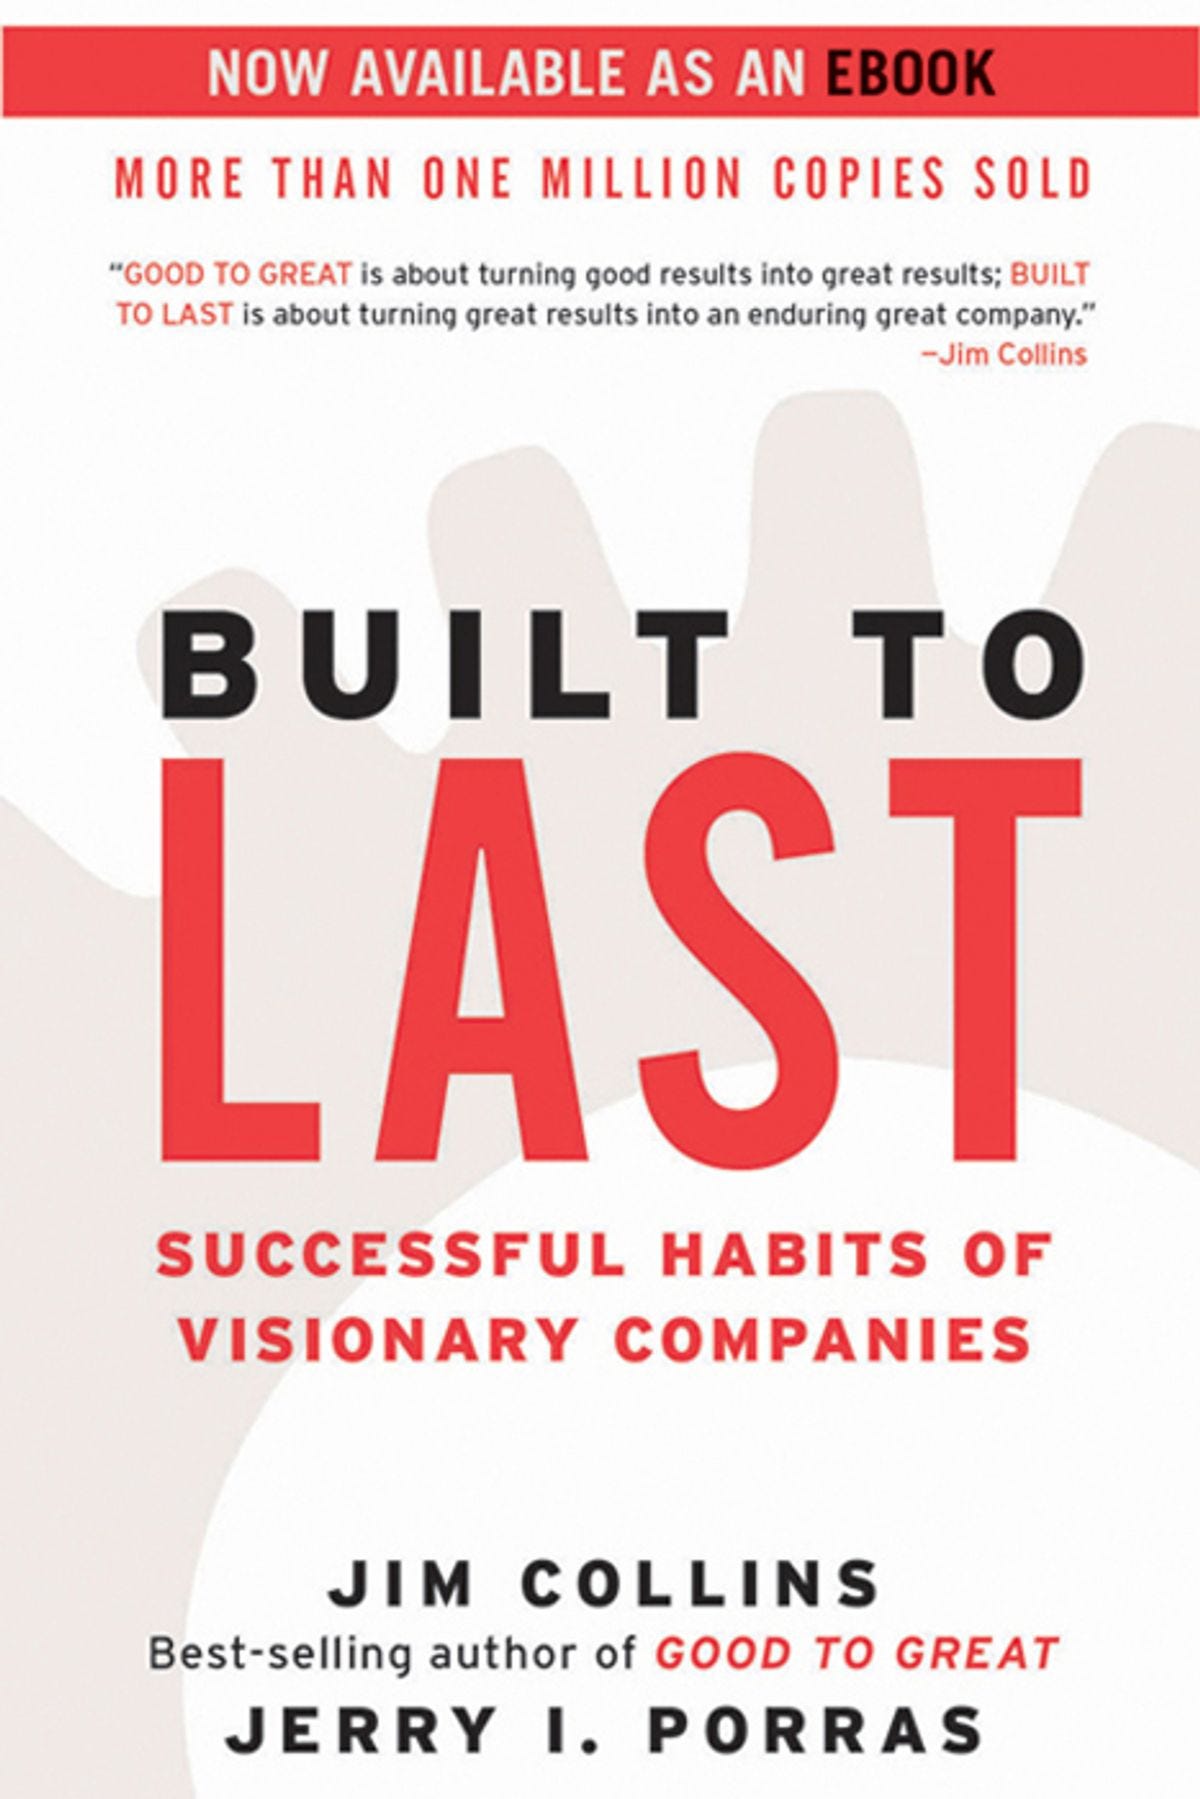 <p>This book draws on six years of research from the Stanford University Graduate School of Business that looks into what separates exceptional companies from their competitors. Bezos has <a href="https://www.inc.com/jeff-haden/10-books-amazon-founder-jeff-bezos-thinks-you-should-read.html">said</a> it's his "favorite business book."</p>